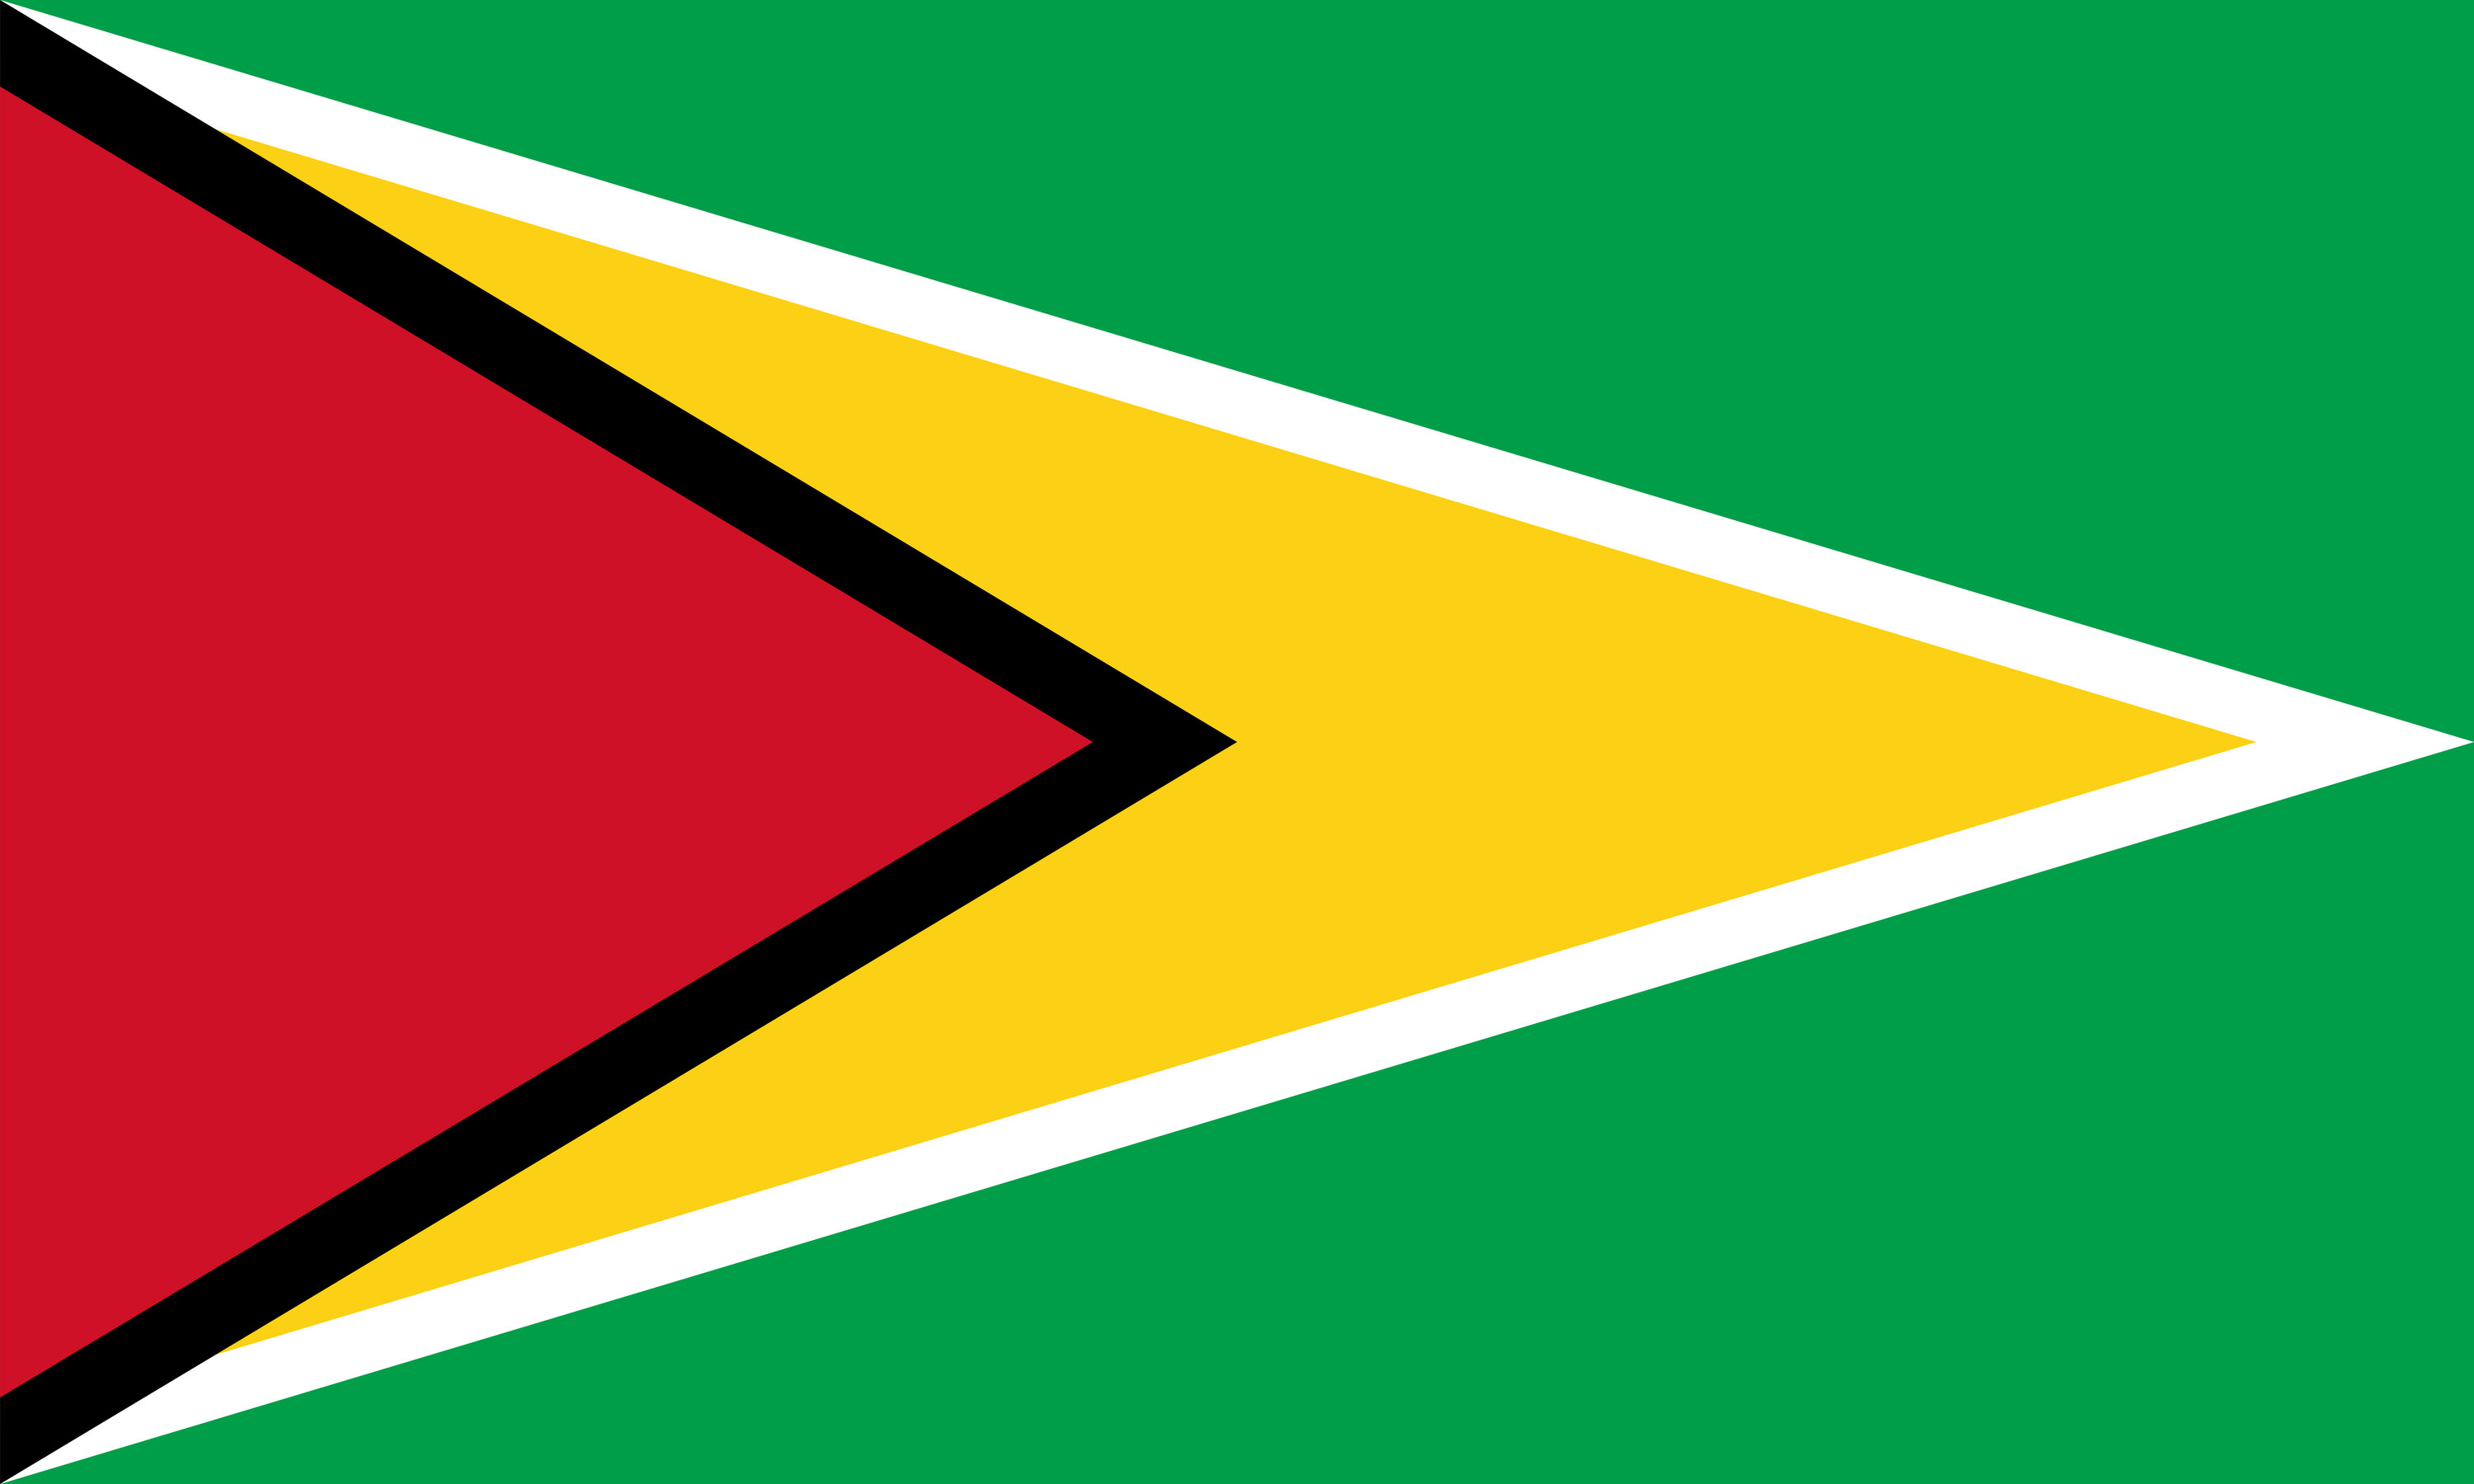 Flag of Guyana, or the Golden Arrowhead,  consisting of a green field incorporating a red hoist triangle and a central yellow arrowhead, separated by black and white borders.